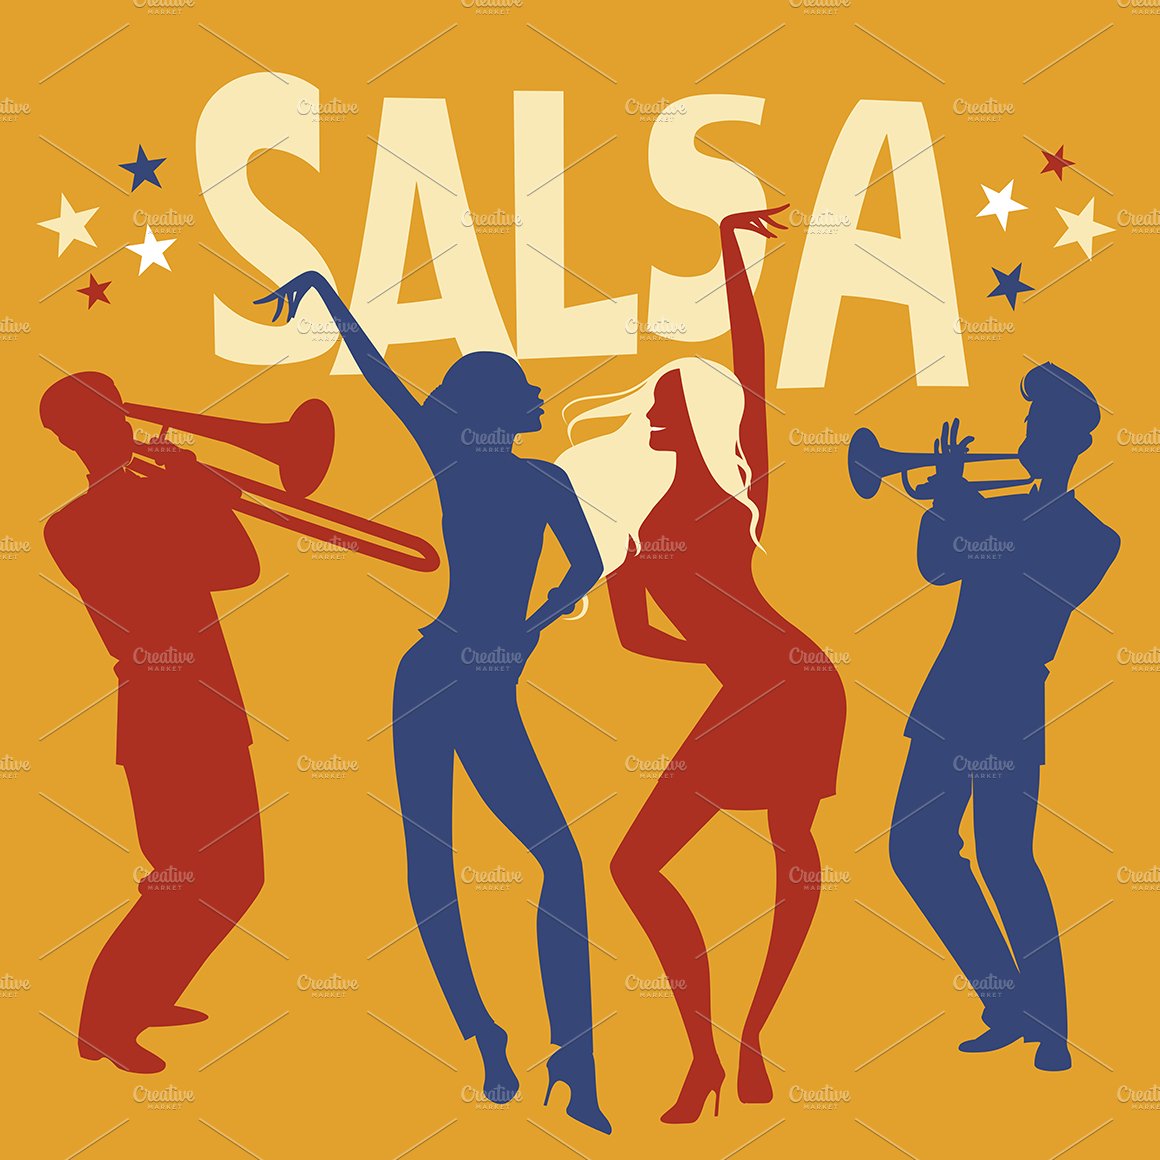 It's Salsa Time! cover image.